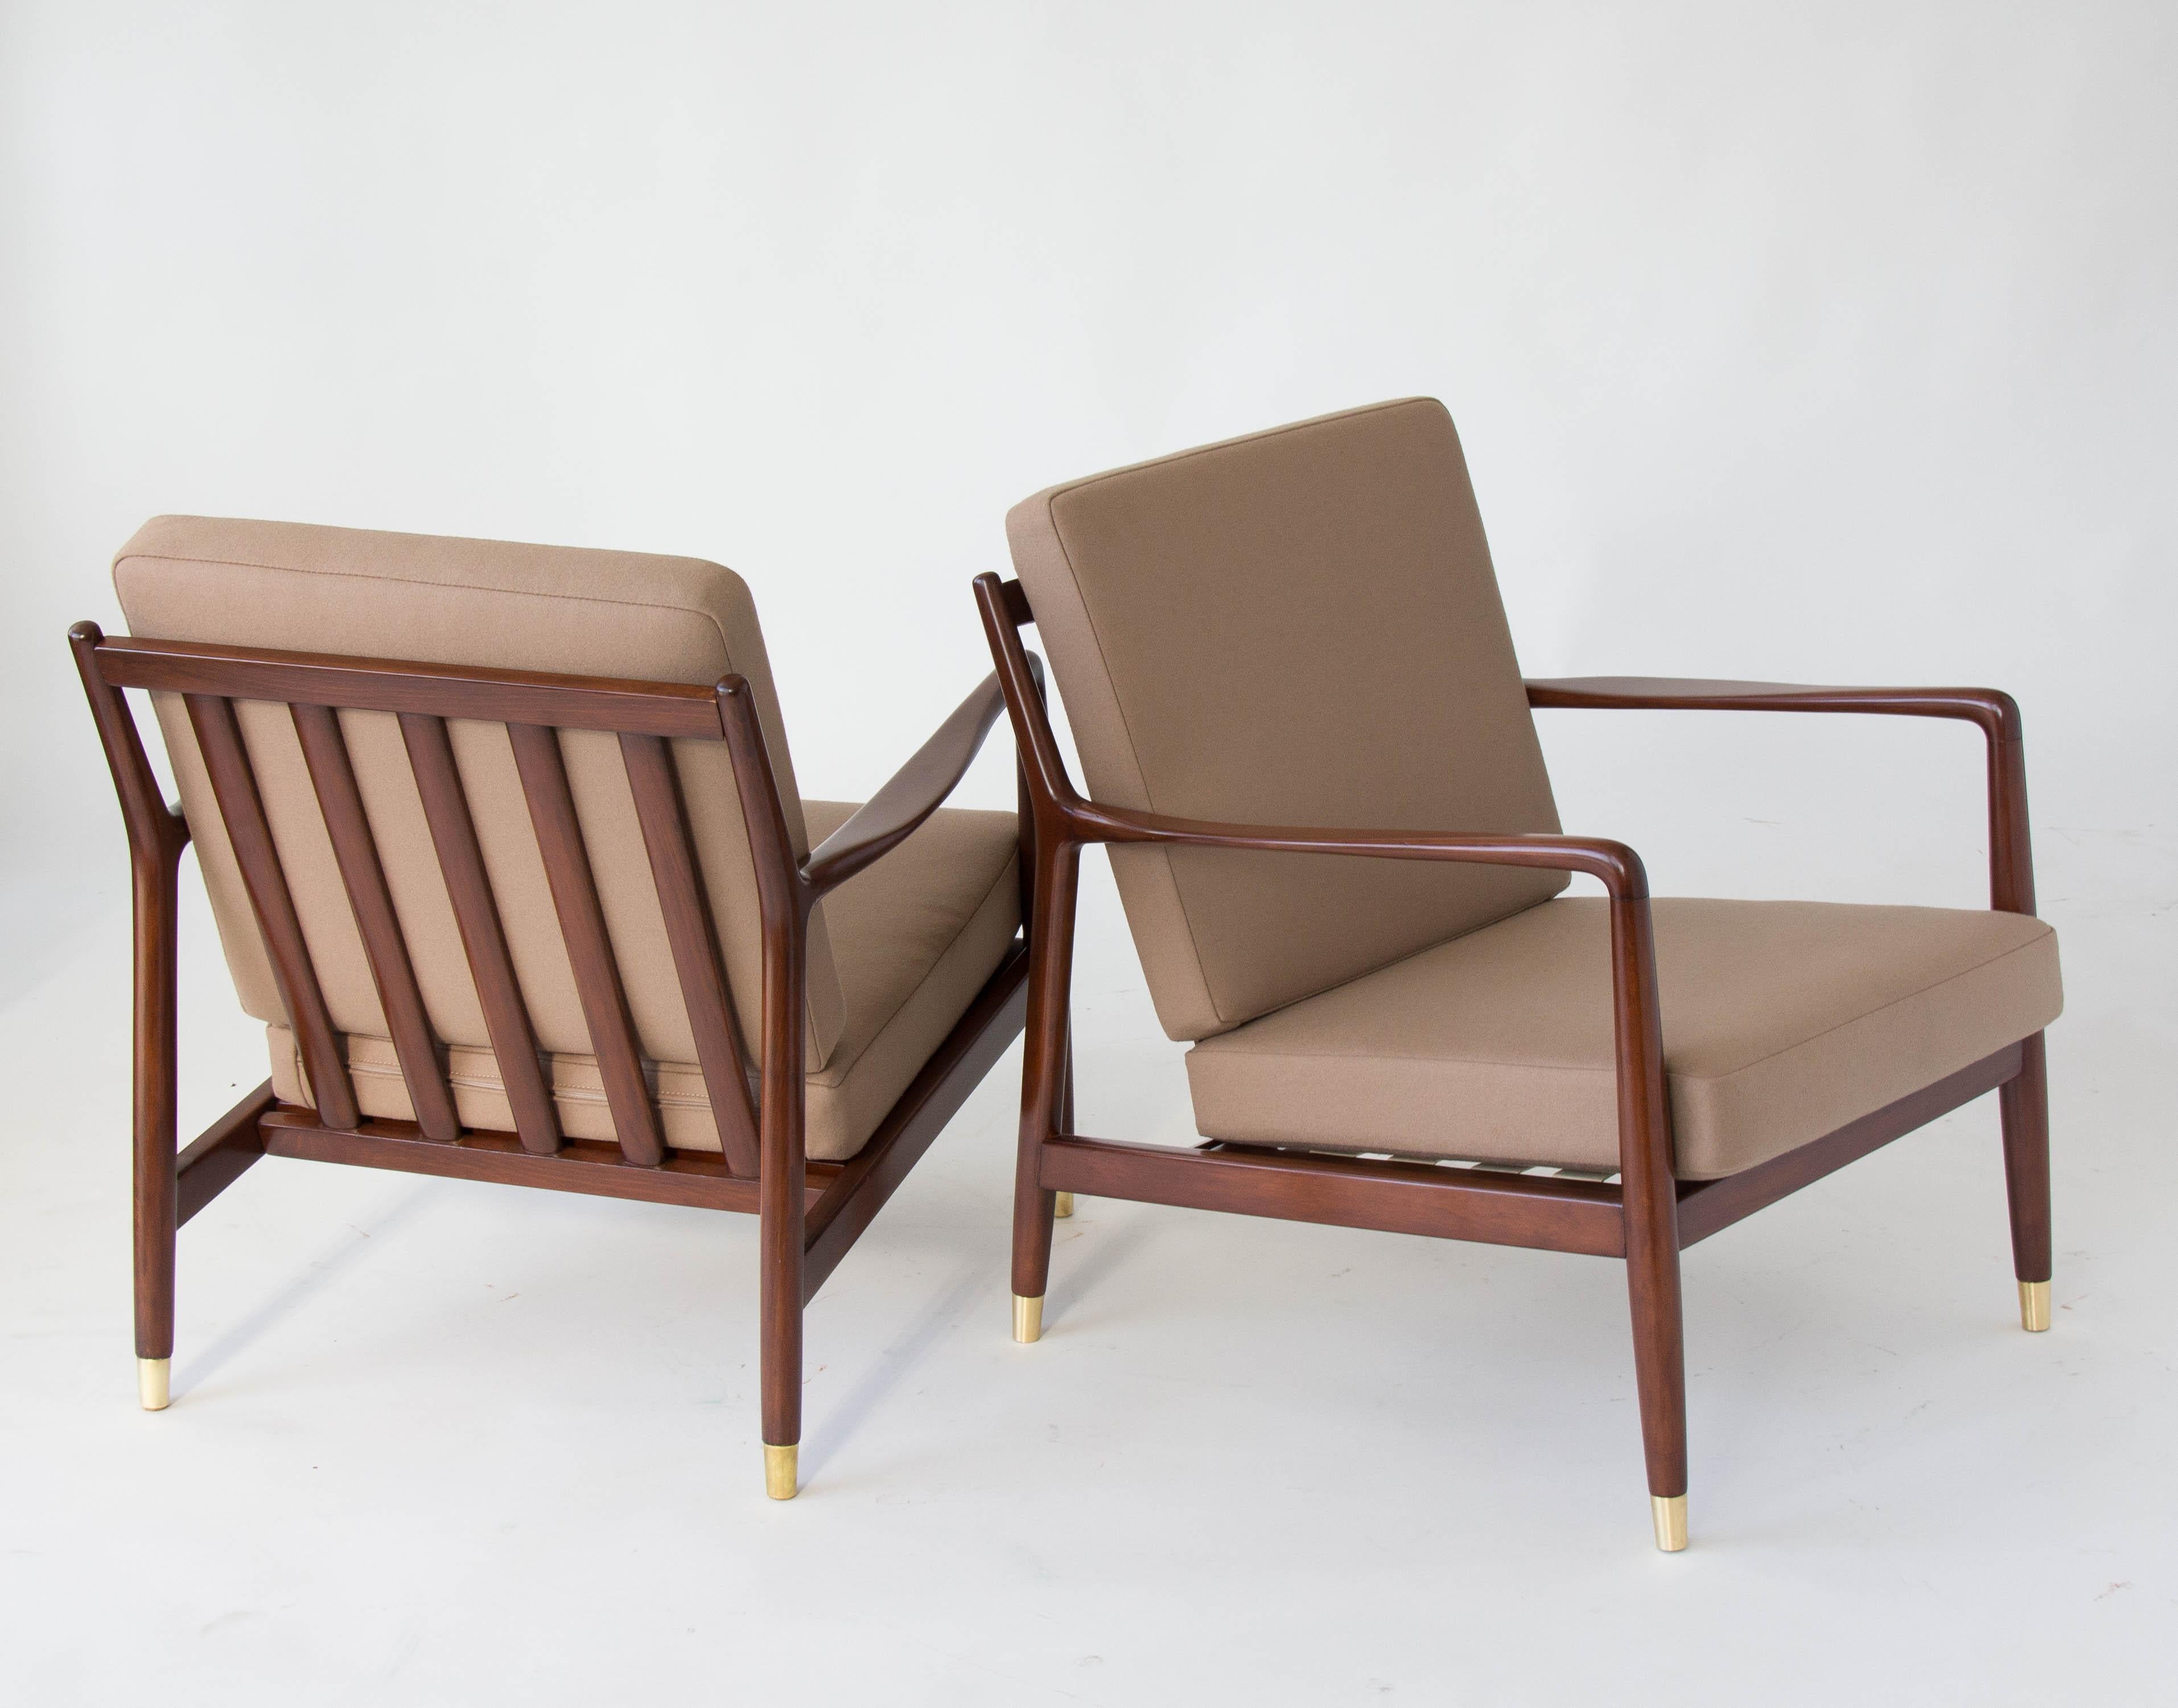 Pair of Lounge Chairs with Brass-Capped Legs by Folke Ohlsson for DUX 2